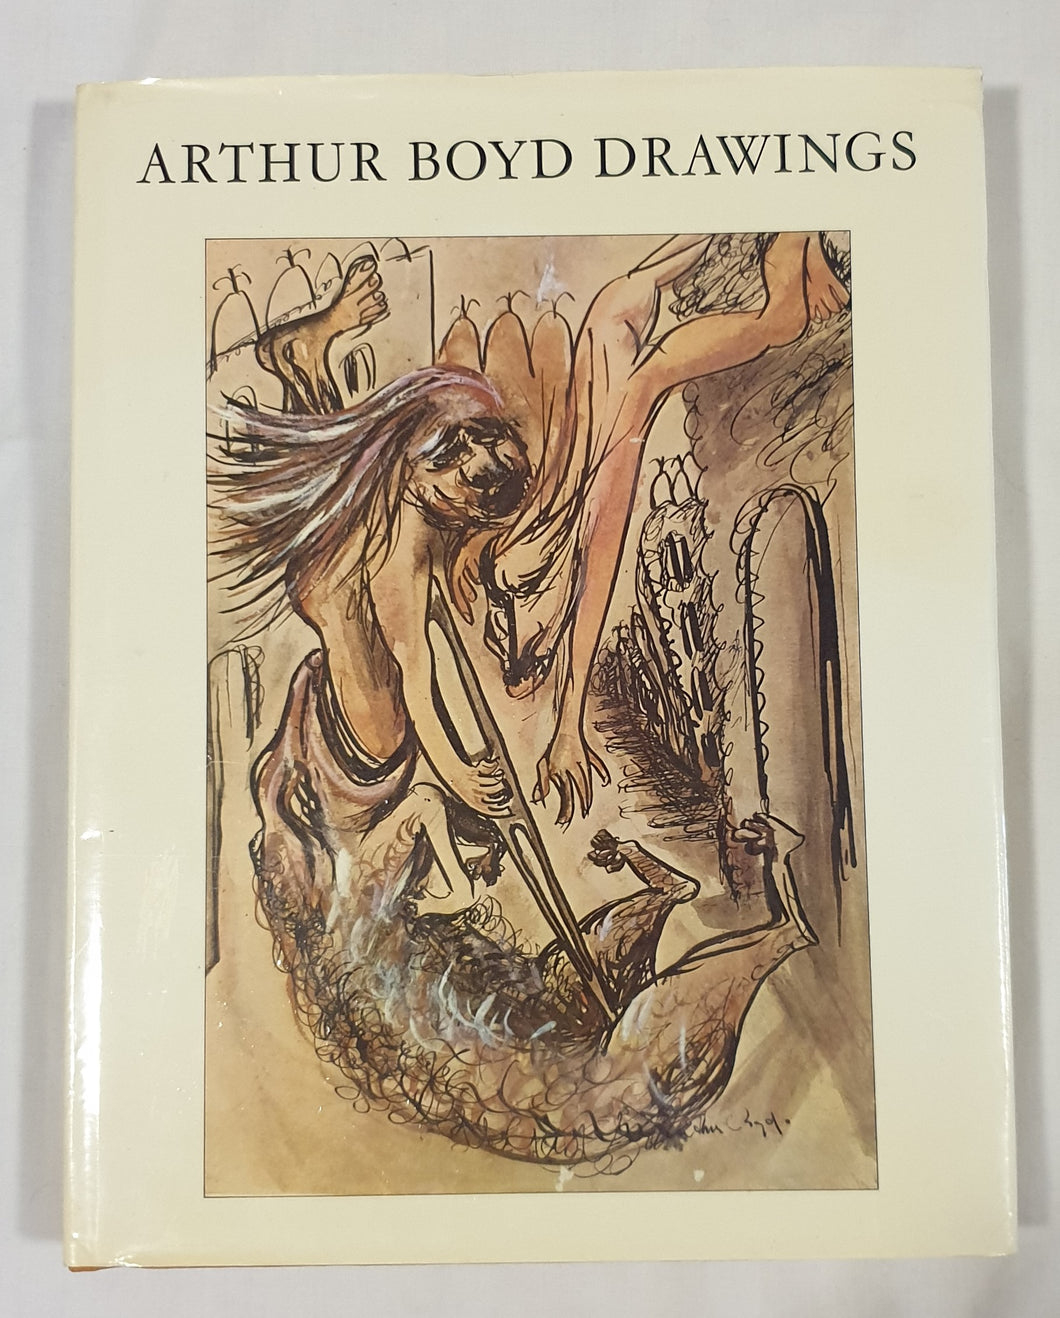 Arthur Boyd Drawings 1934-1970 by Laurie Thomas and Christopher Tadgell